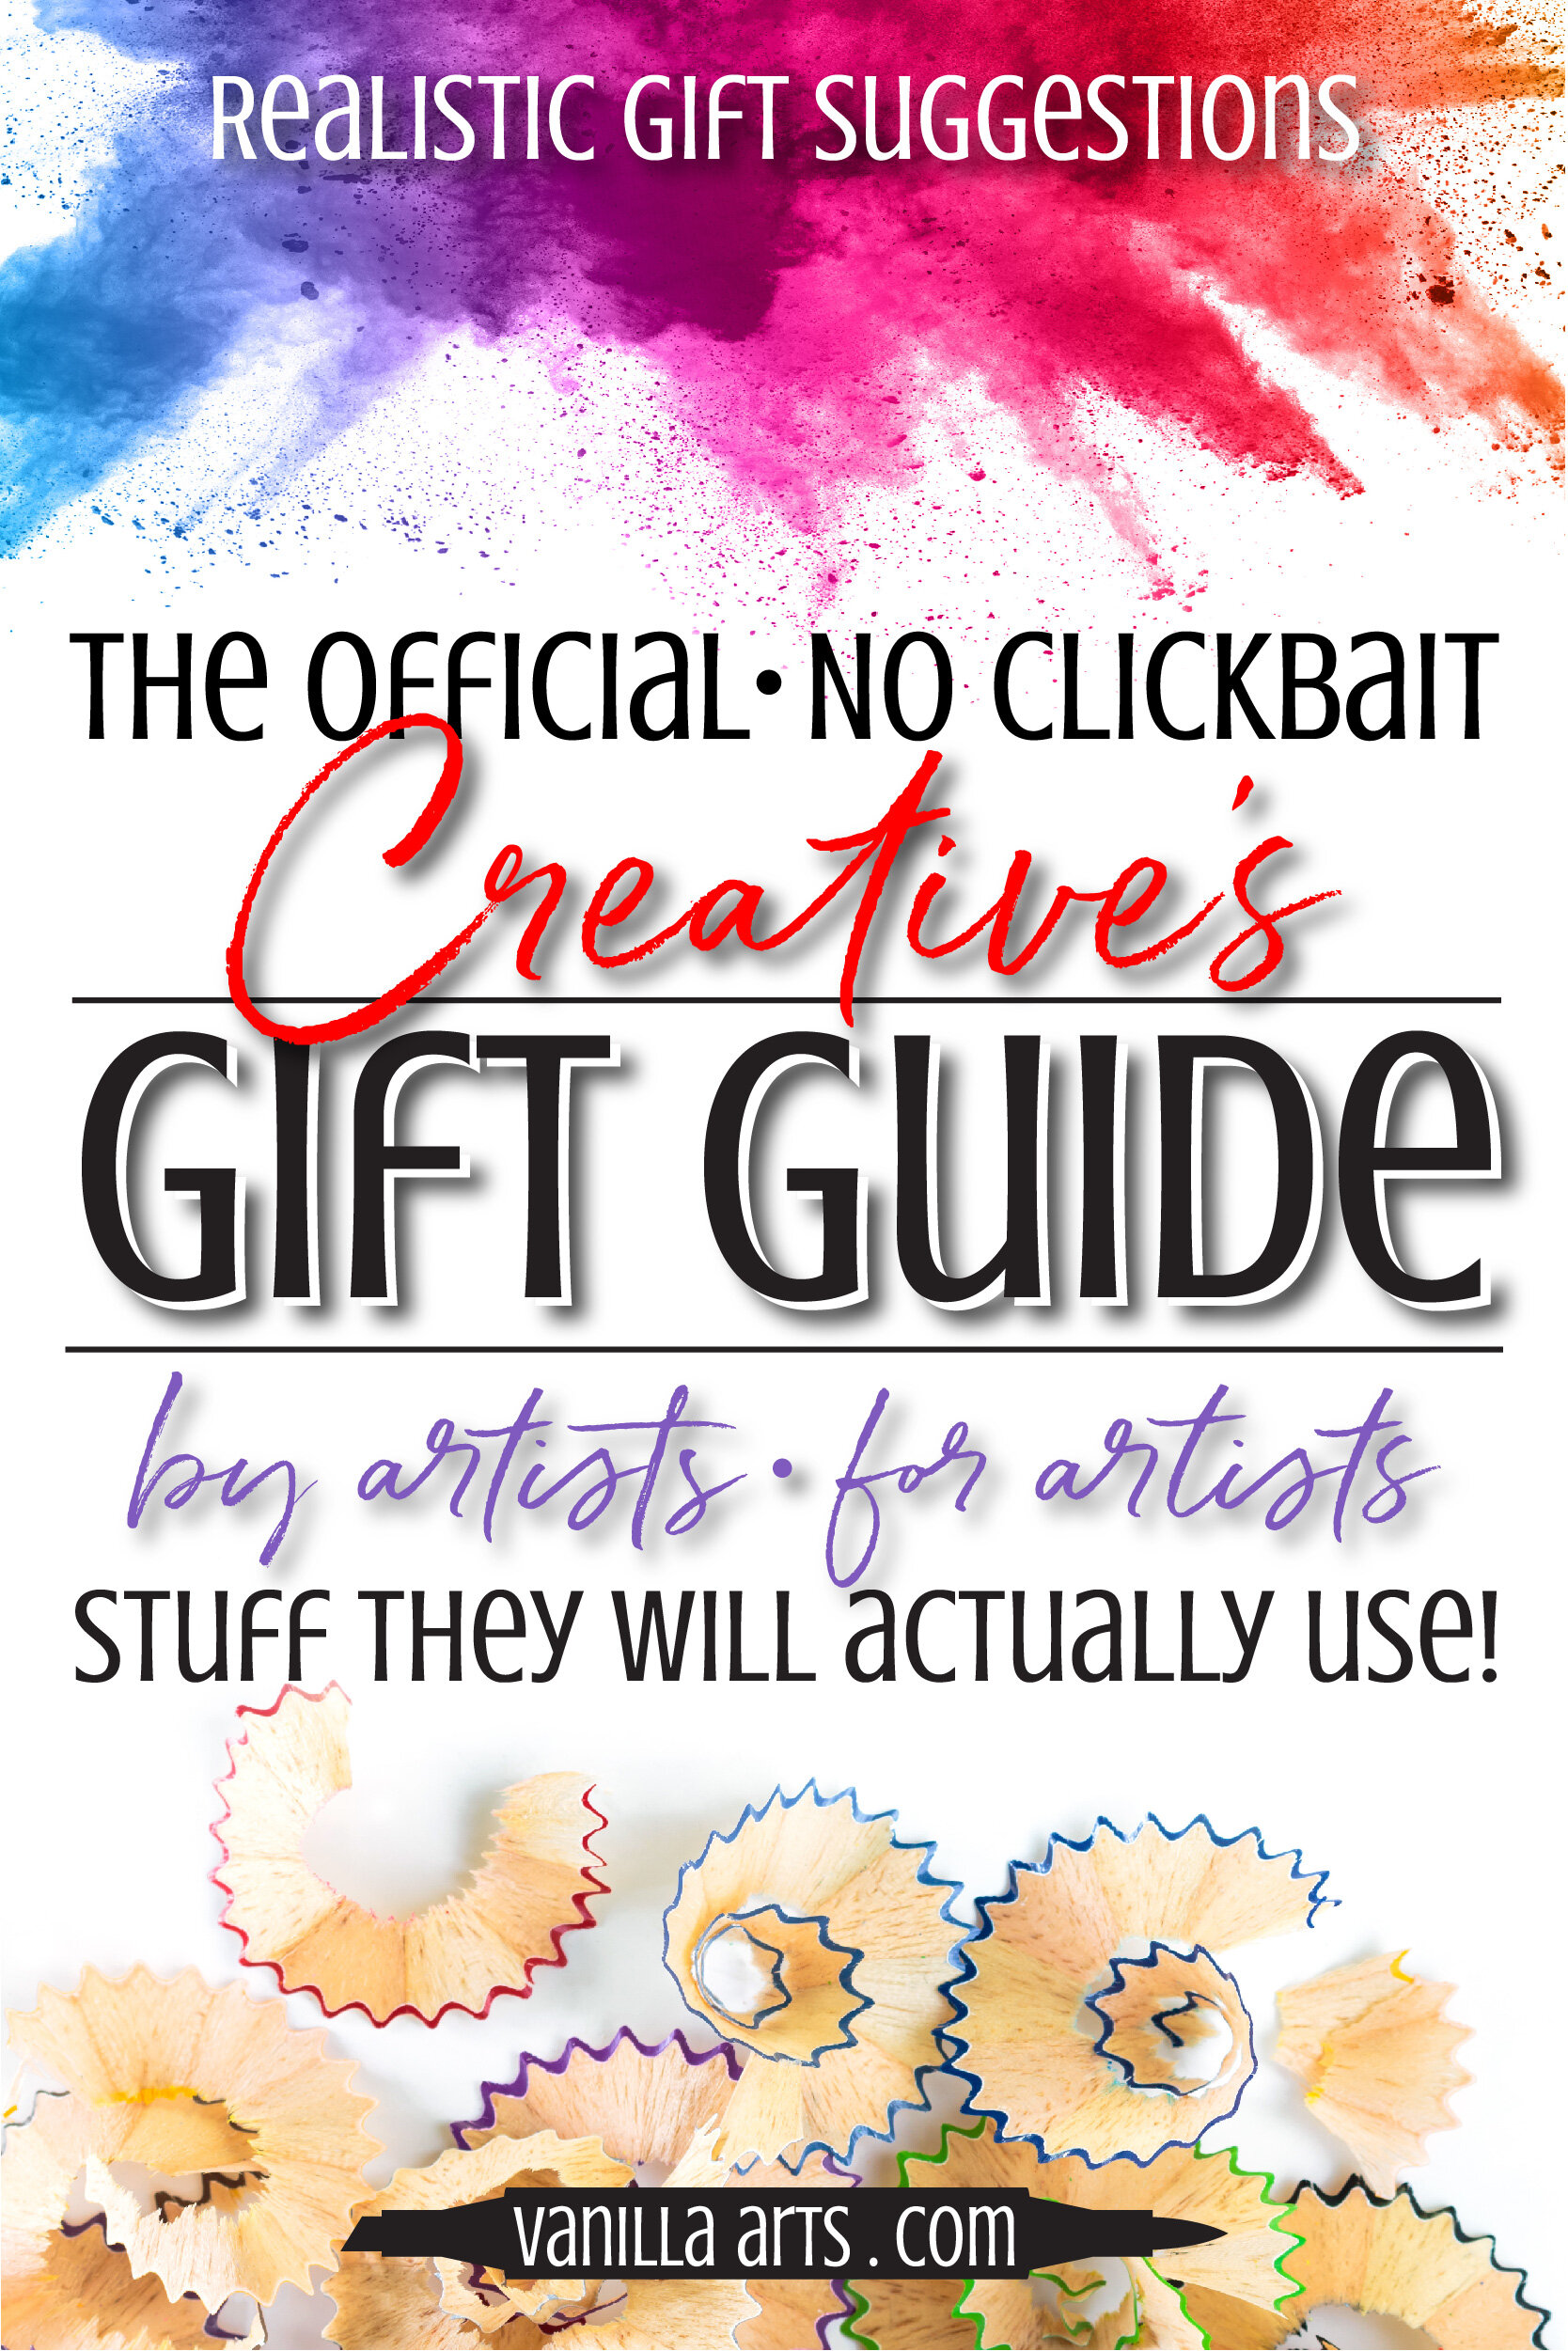 Creative's Gift Guide #2 Studio & Storage: Ideas from Artists for